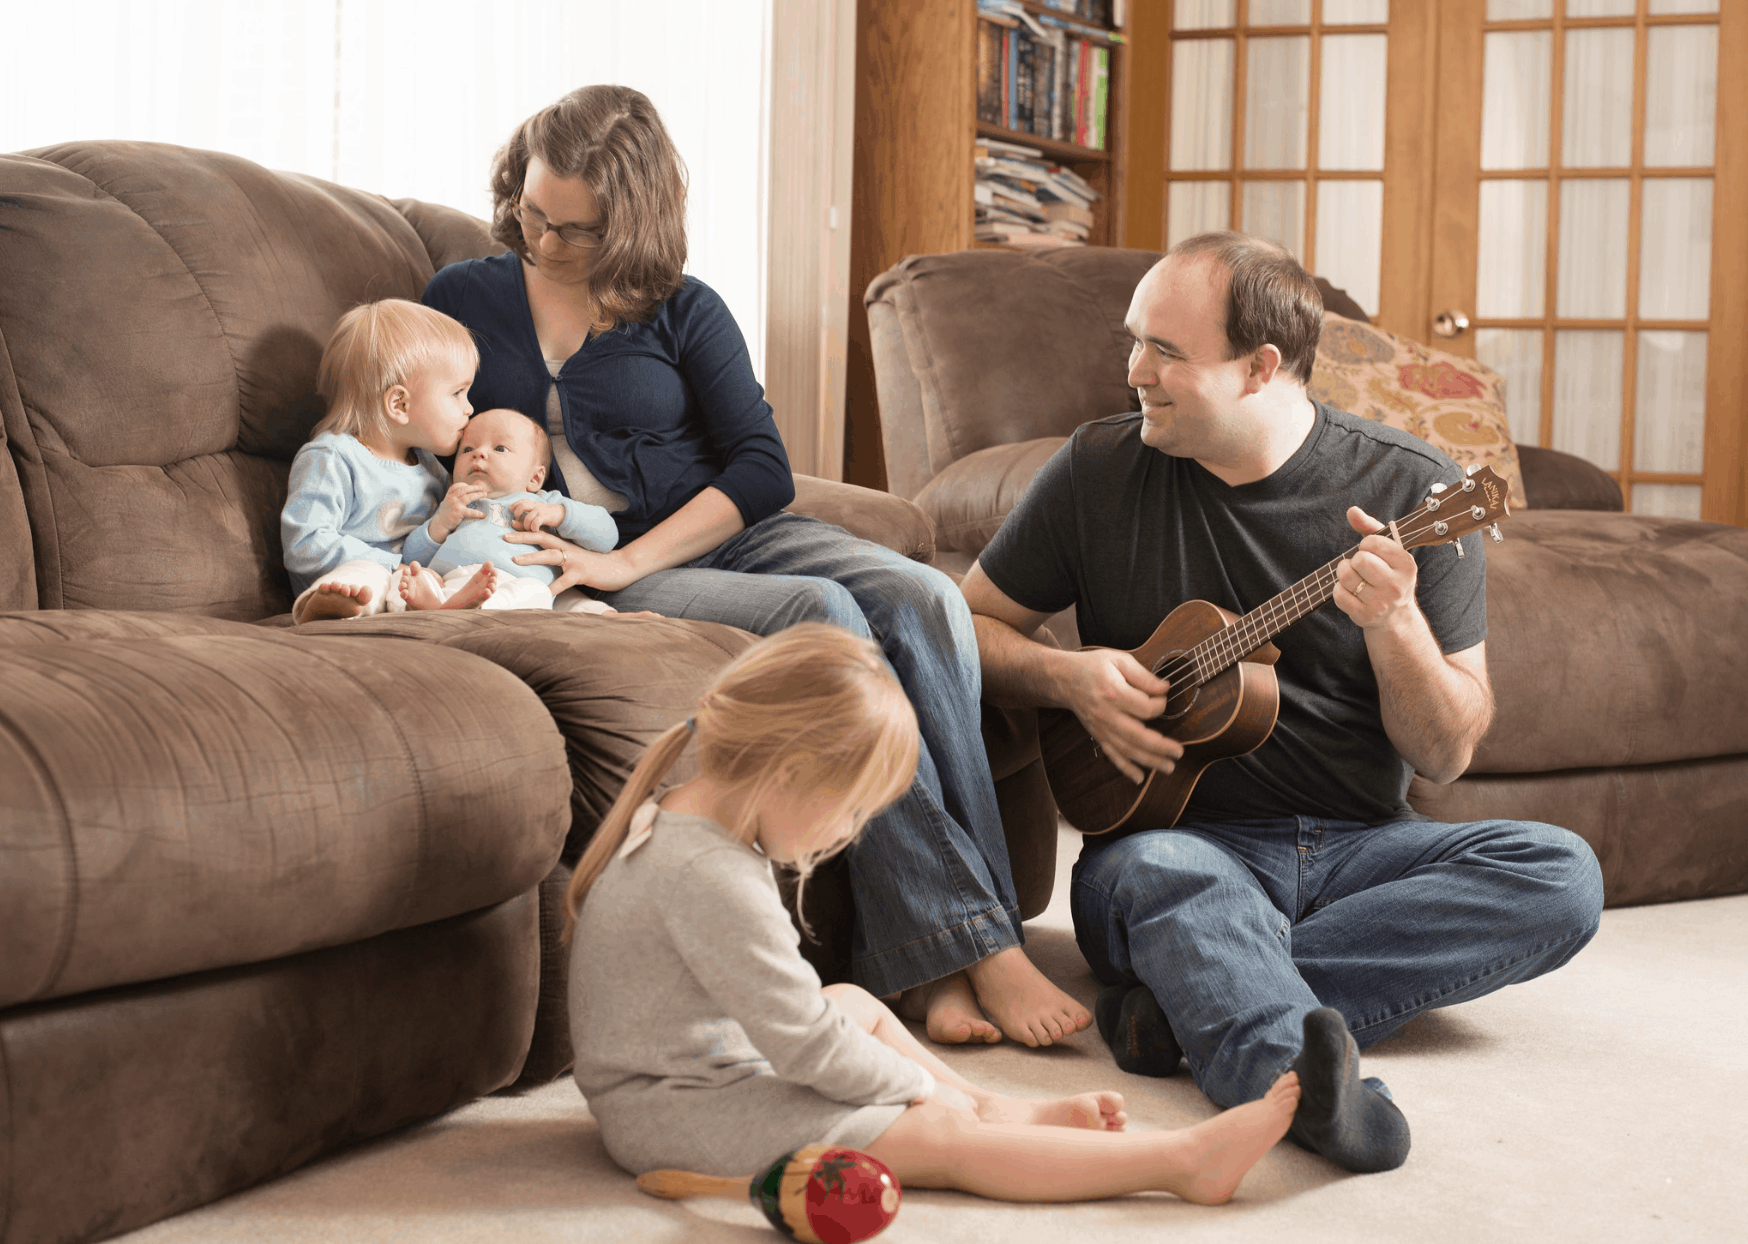 family sitting on couch with preschooler, toddler, and newborn